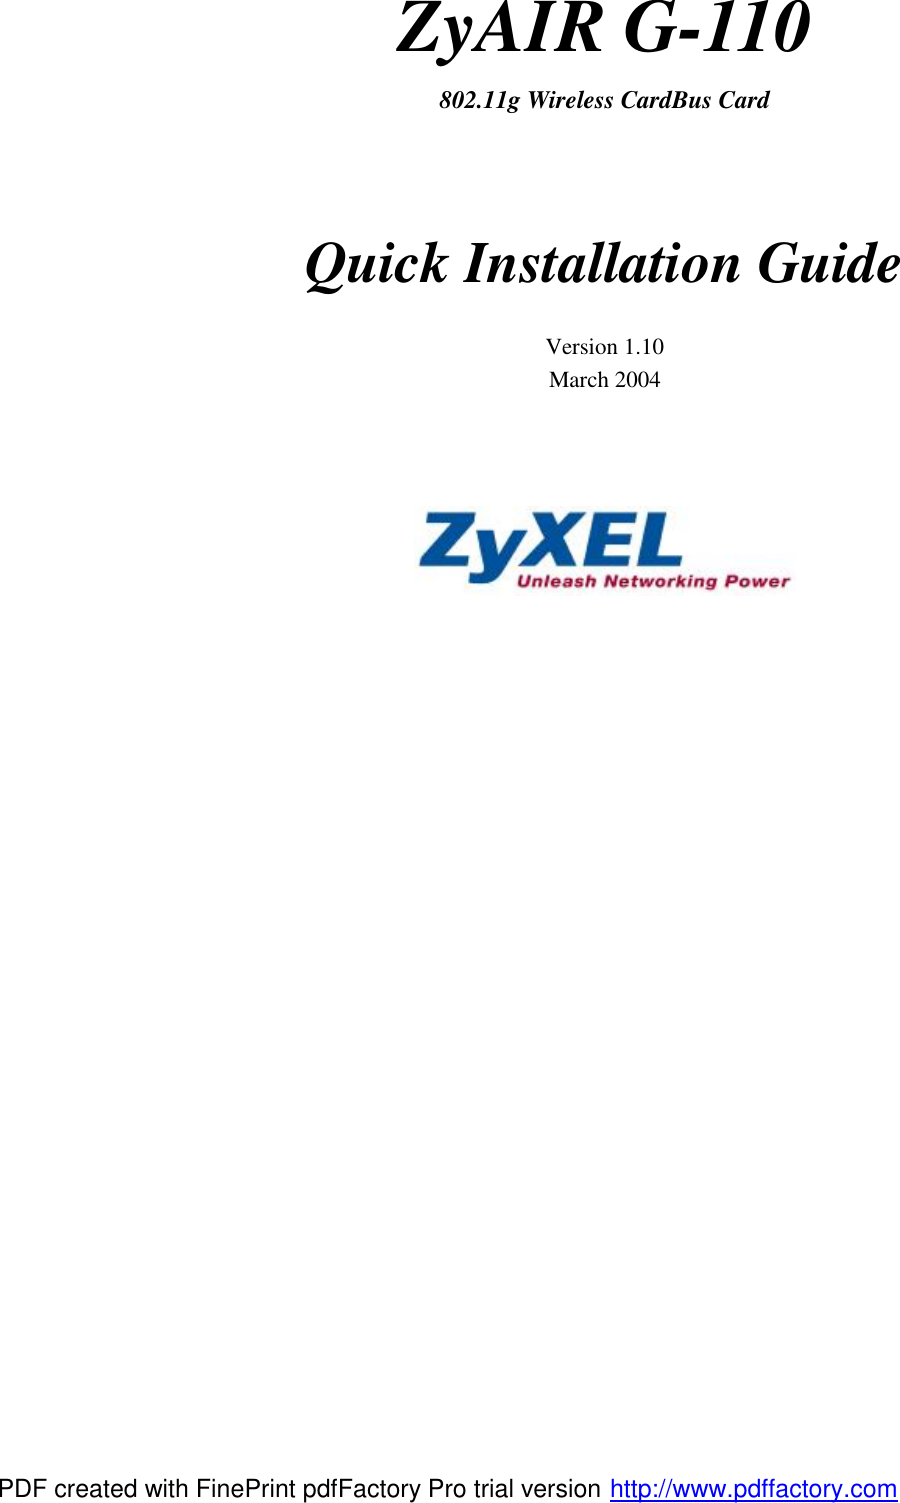 ZyAIR G-110 802.11g Wireless CardBus Card   Quick Installation Guide  Version 1.10 March 2004     PDF created with FinePrint pdfFactory Pro trial version http://www.pdffactory.com